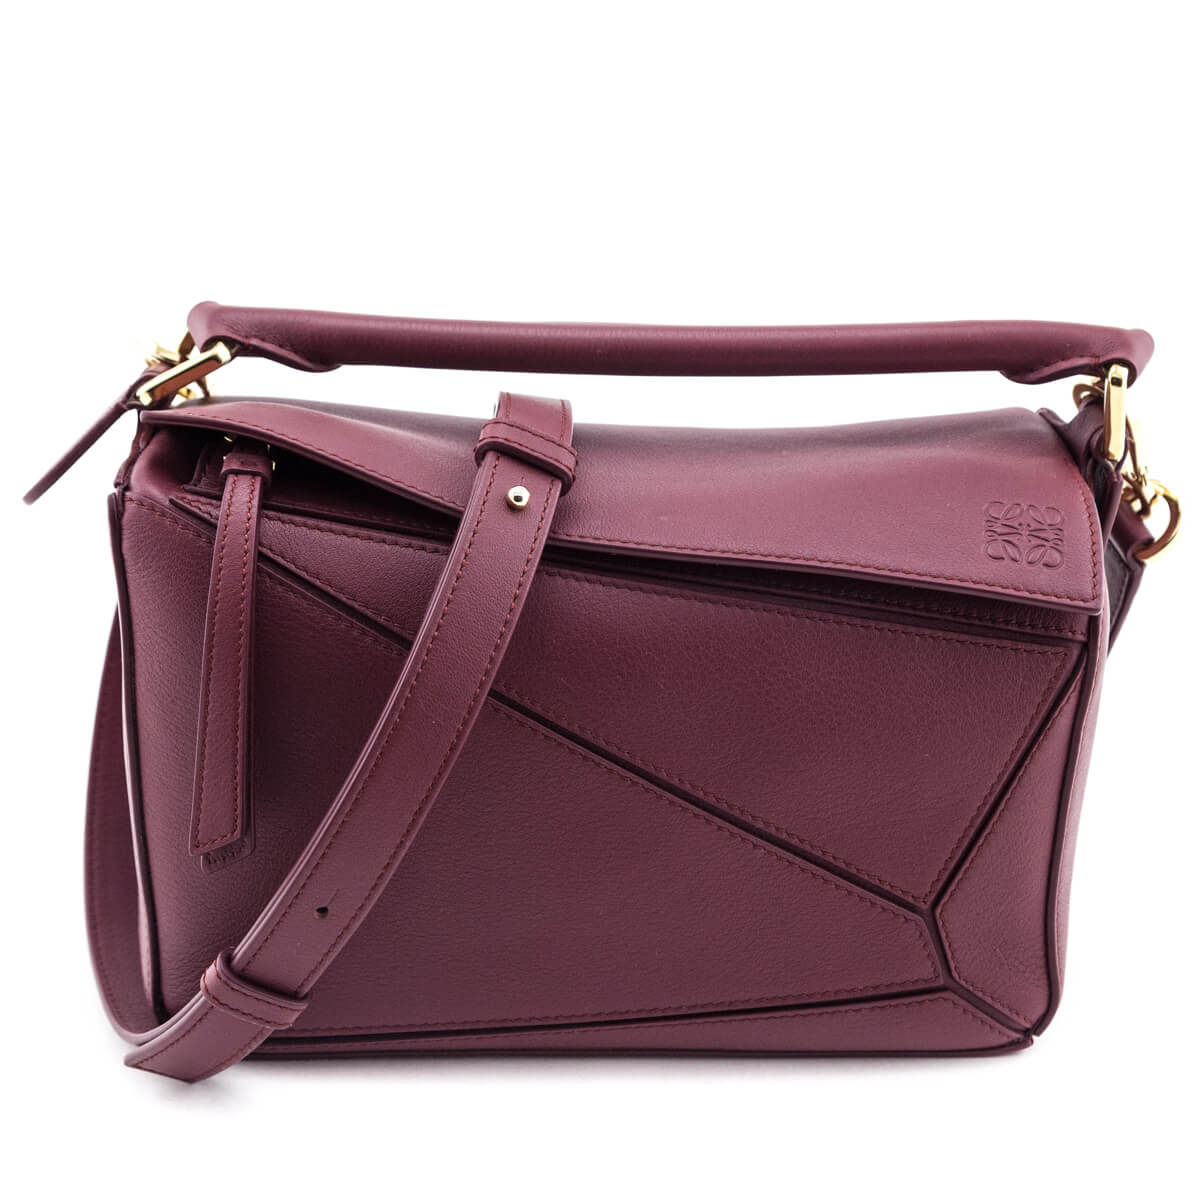 Loewe Wild Berry Small Puzzle Bag - Love that Bag etc - Preowned Authentic Designer Handbags & Preloved Fashions